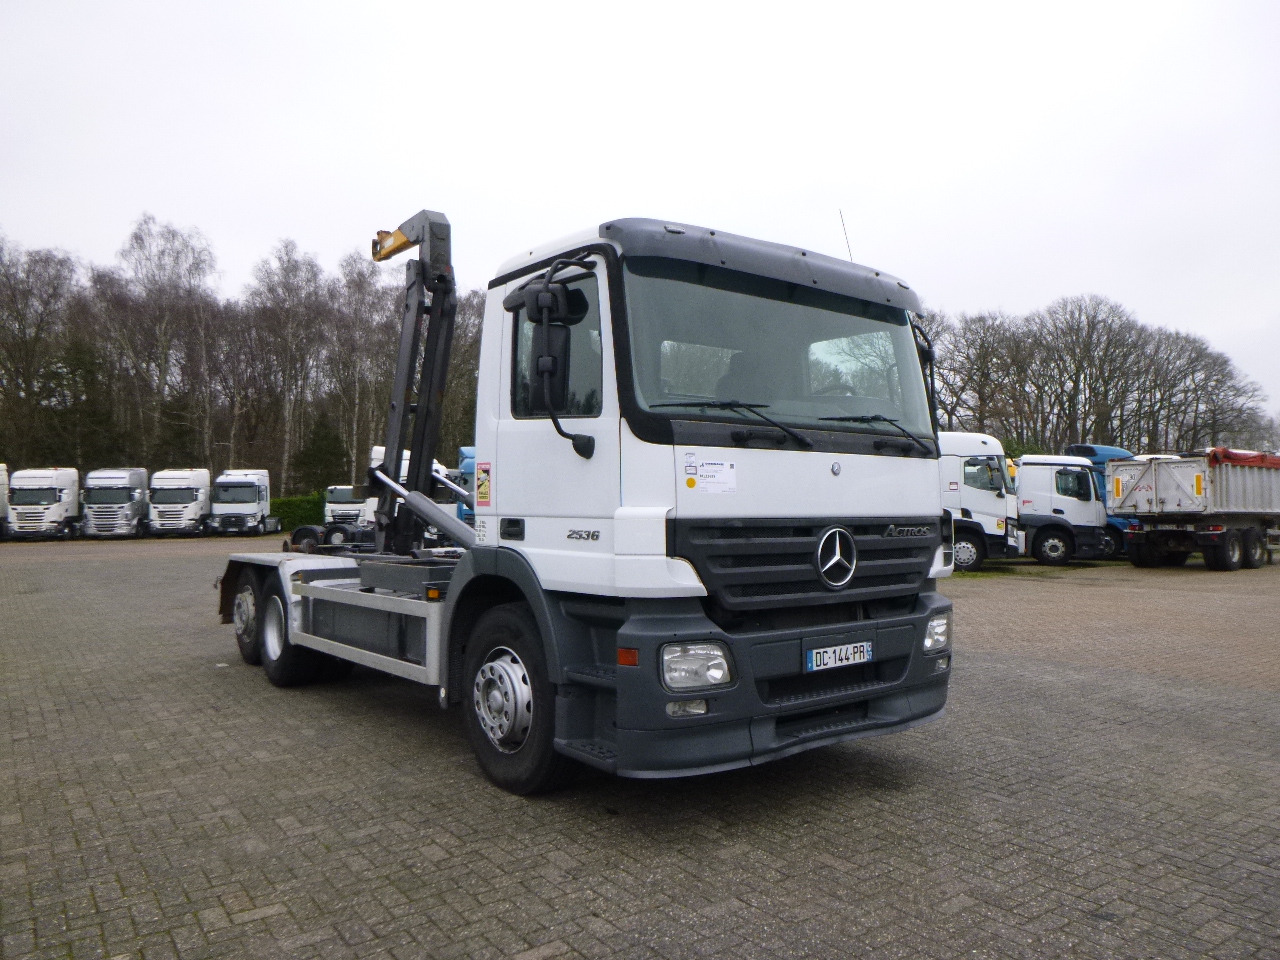 Hook lift truck Mercedes Actros 2536 6x2 Guima container hook 16 t: picture 2